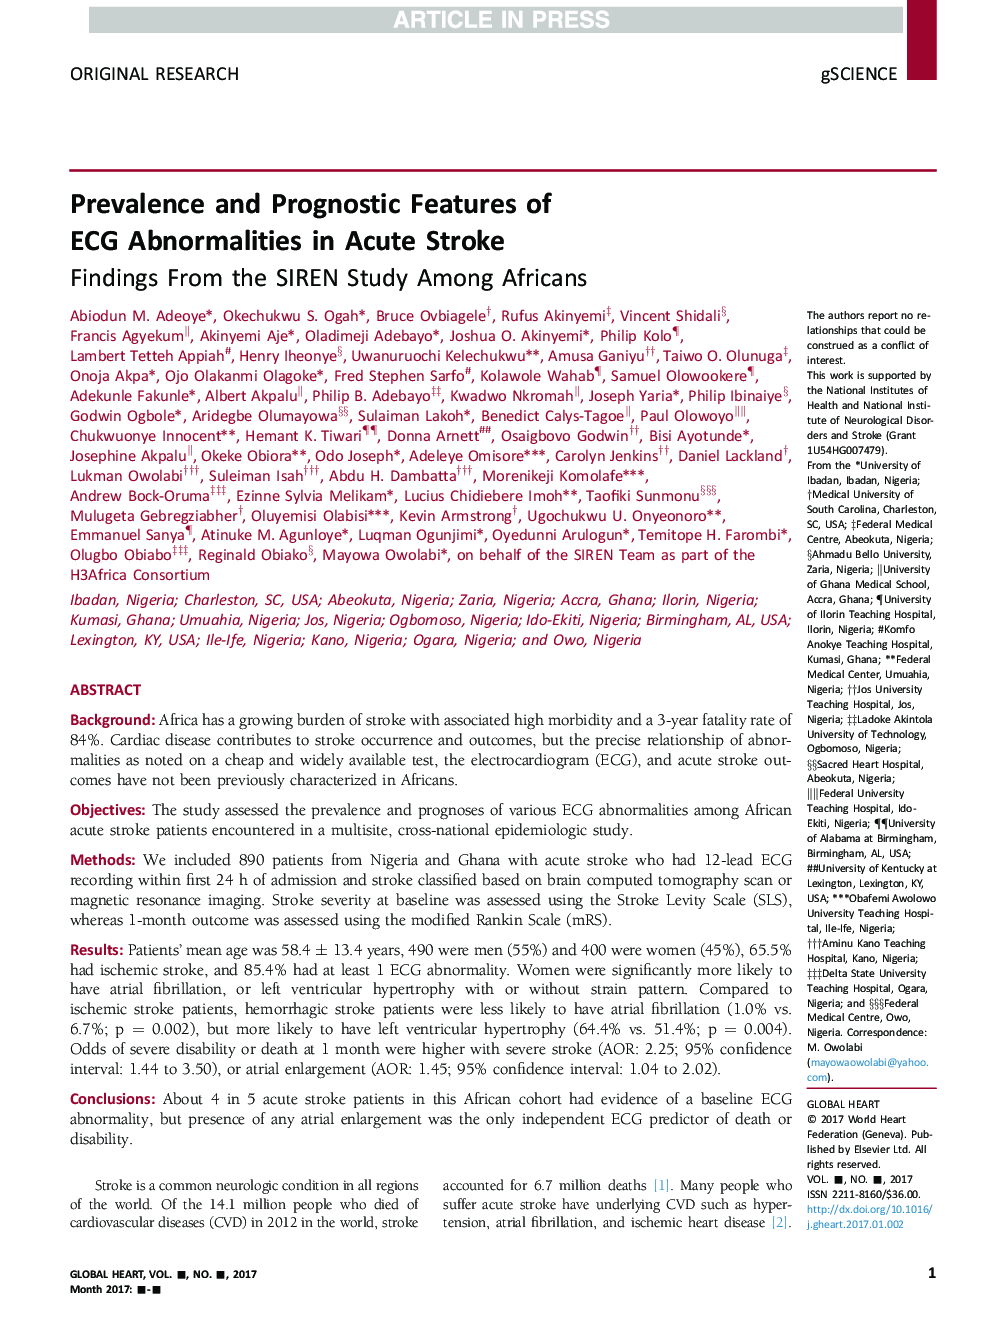 Prevalence and Prognostic Features of ECG Abnormalities in Acute Stroke